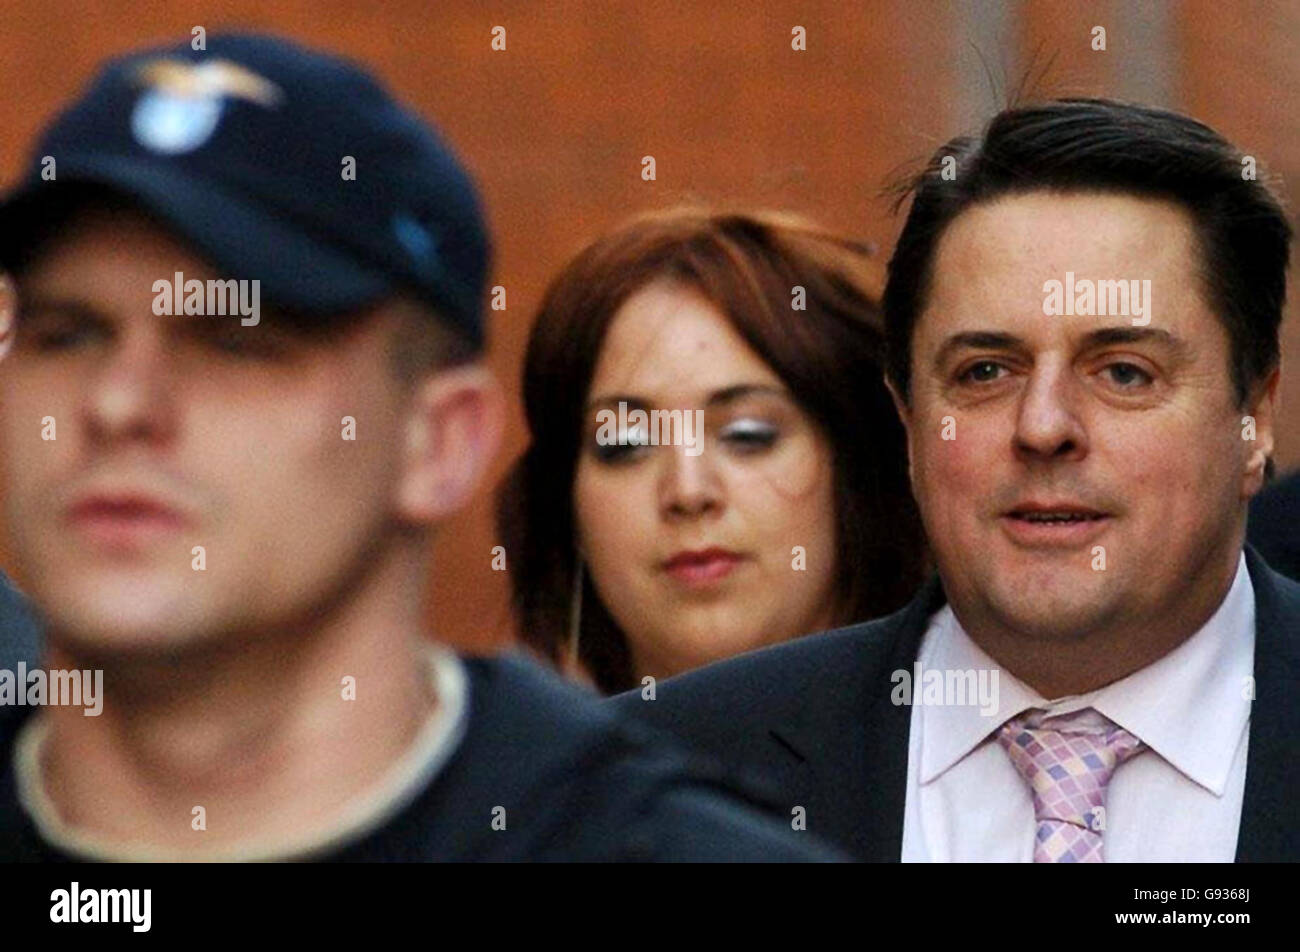 The leader of the BNP Nick Griffin arrives at Leeds Crown Court, Tuesday January 17, 2006, where the prosecution is expected to begin opening its case against British National Party (BNP) leader Nick Griffin, who is accused of a series of race hate charges. Griffin, 45, and fellow party activist Mark Collett, 24, face charges arising out of speeches featured in an undercover BBC documentary on the party. See PA Story COURTS BNP. PRESS ASSOCIATION Photo. Photo credit should read: John Giles/PA Stock Photo